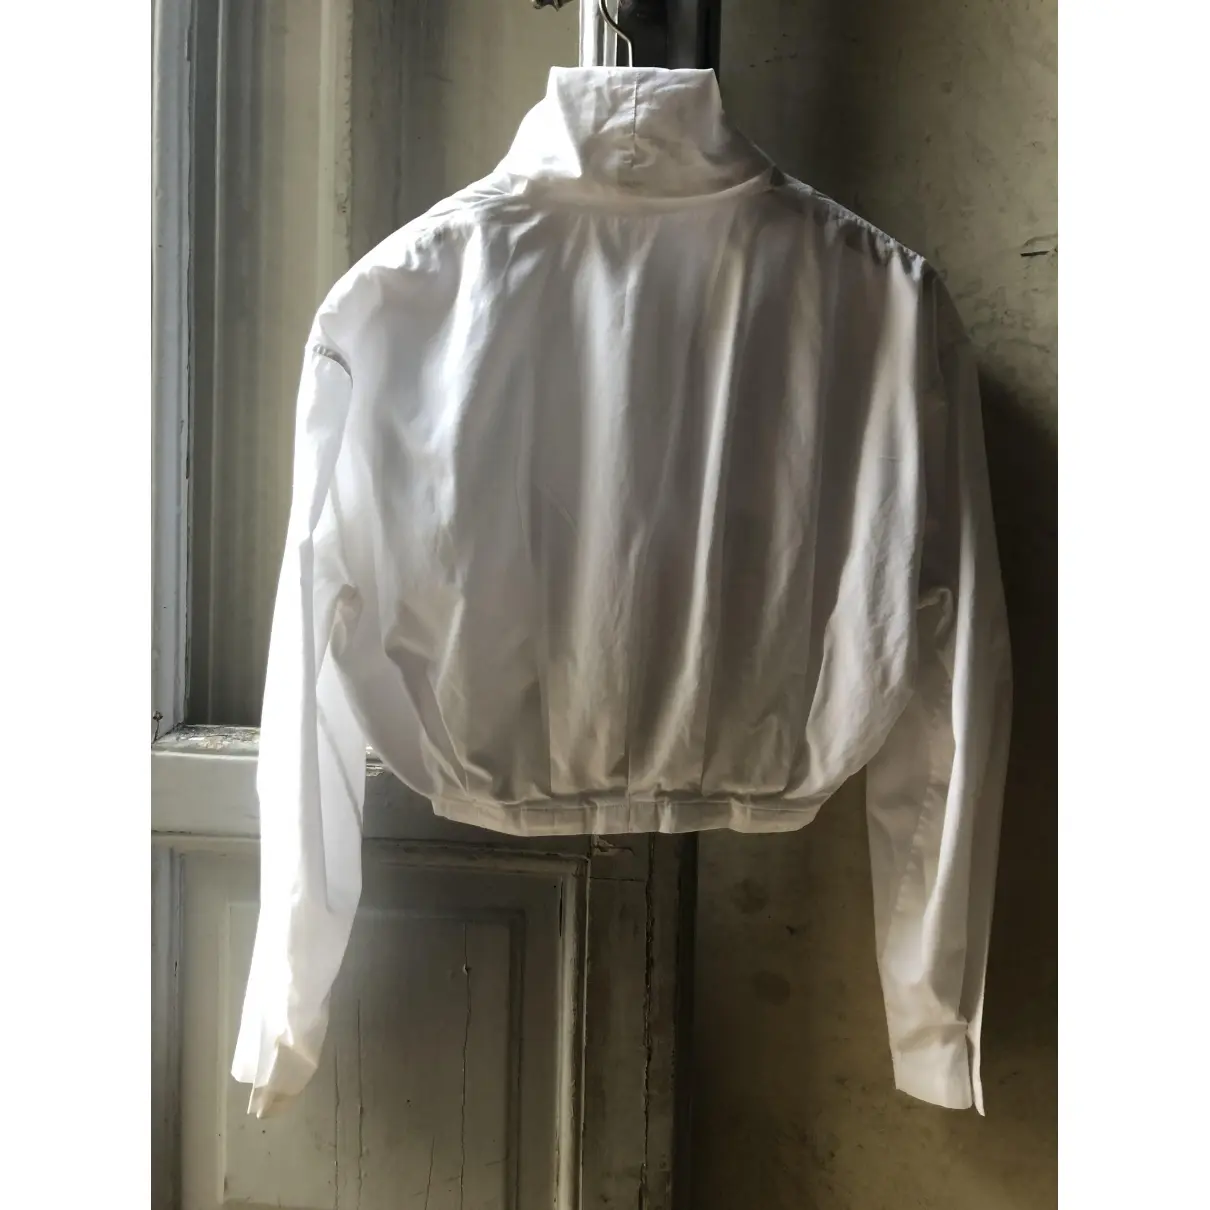 Romeo Gigli Shirt for sale - Vintage